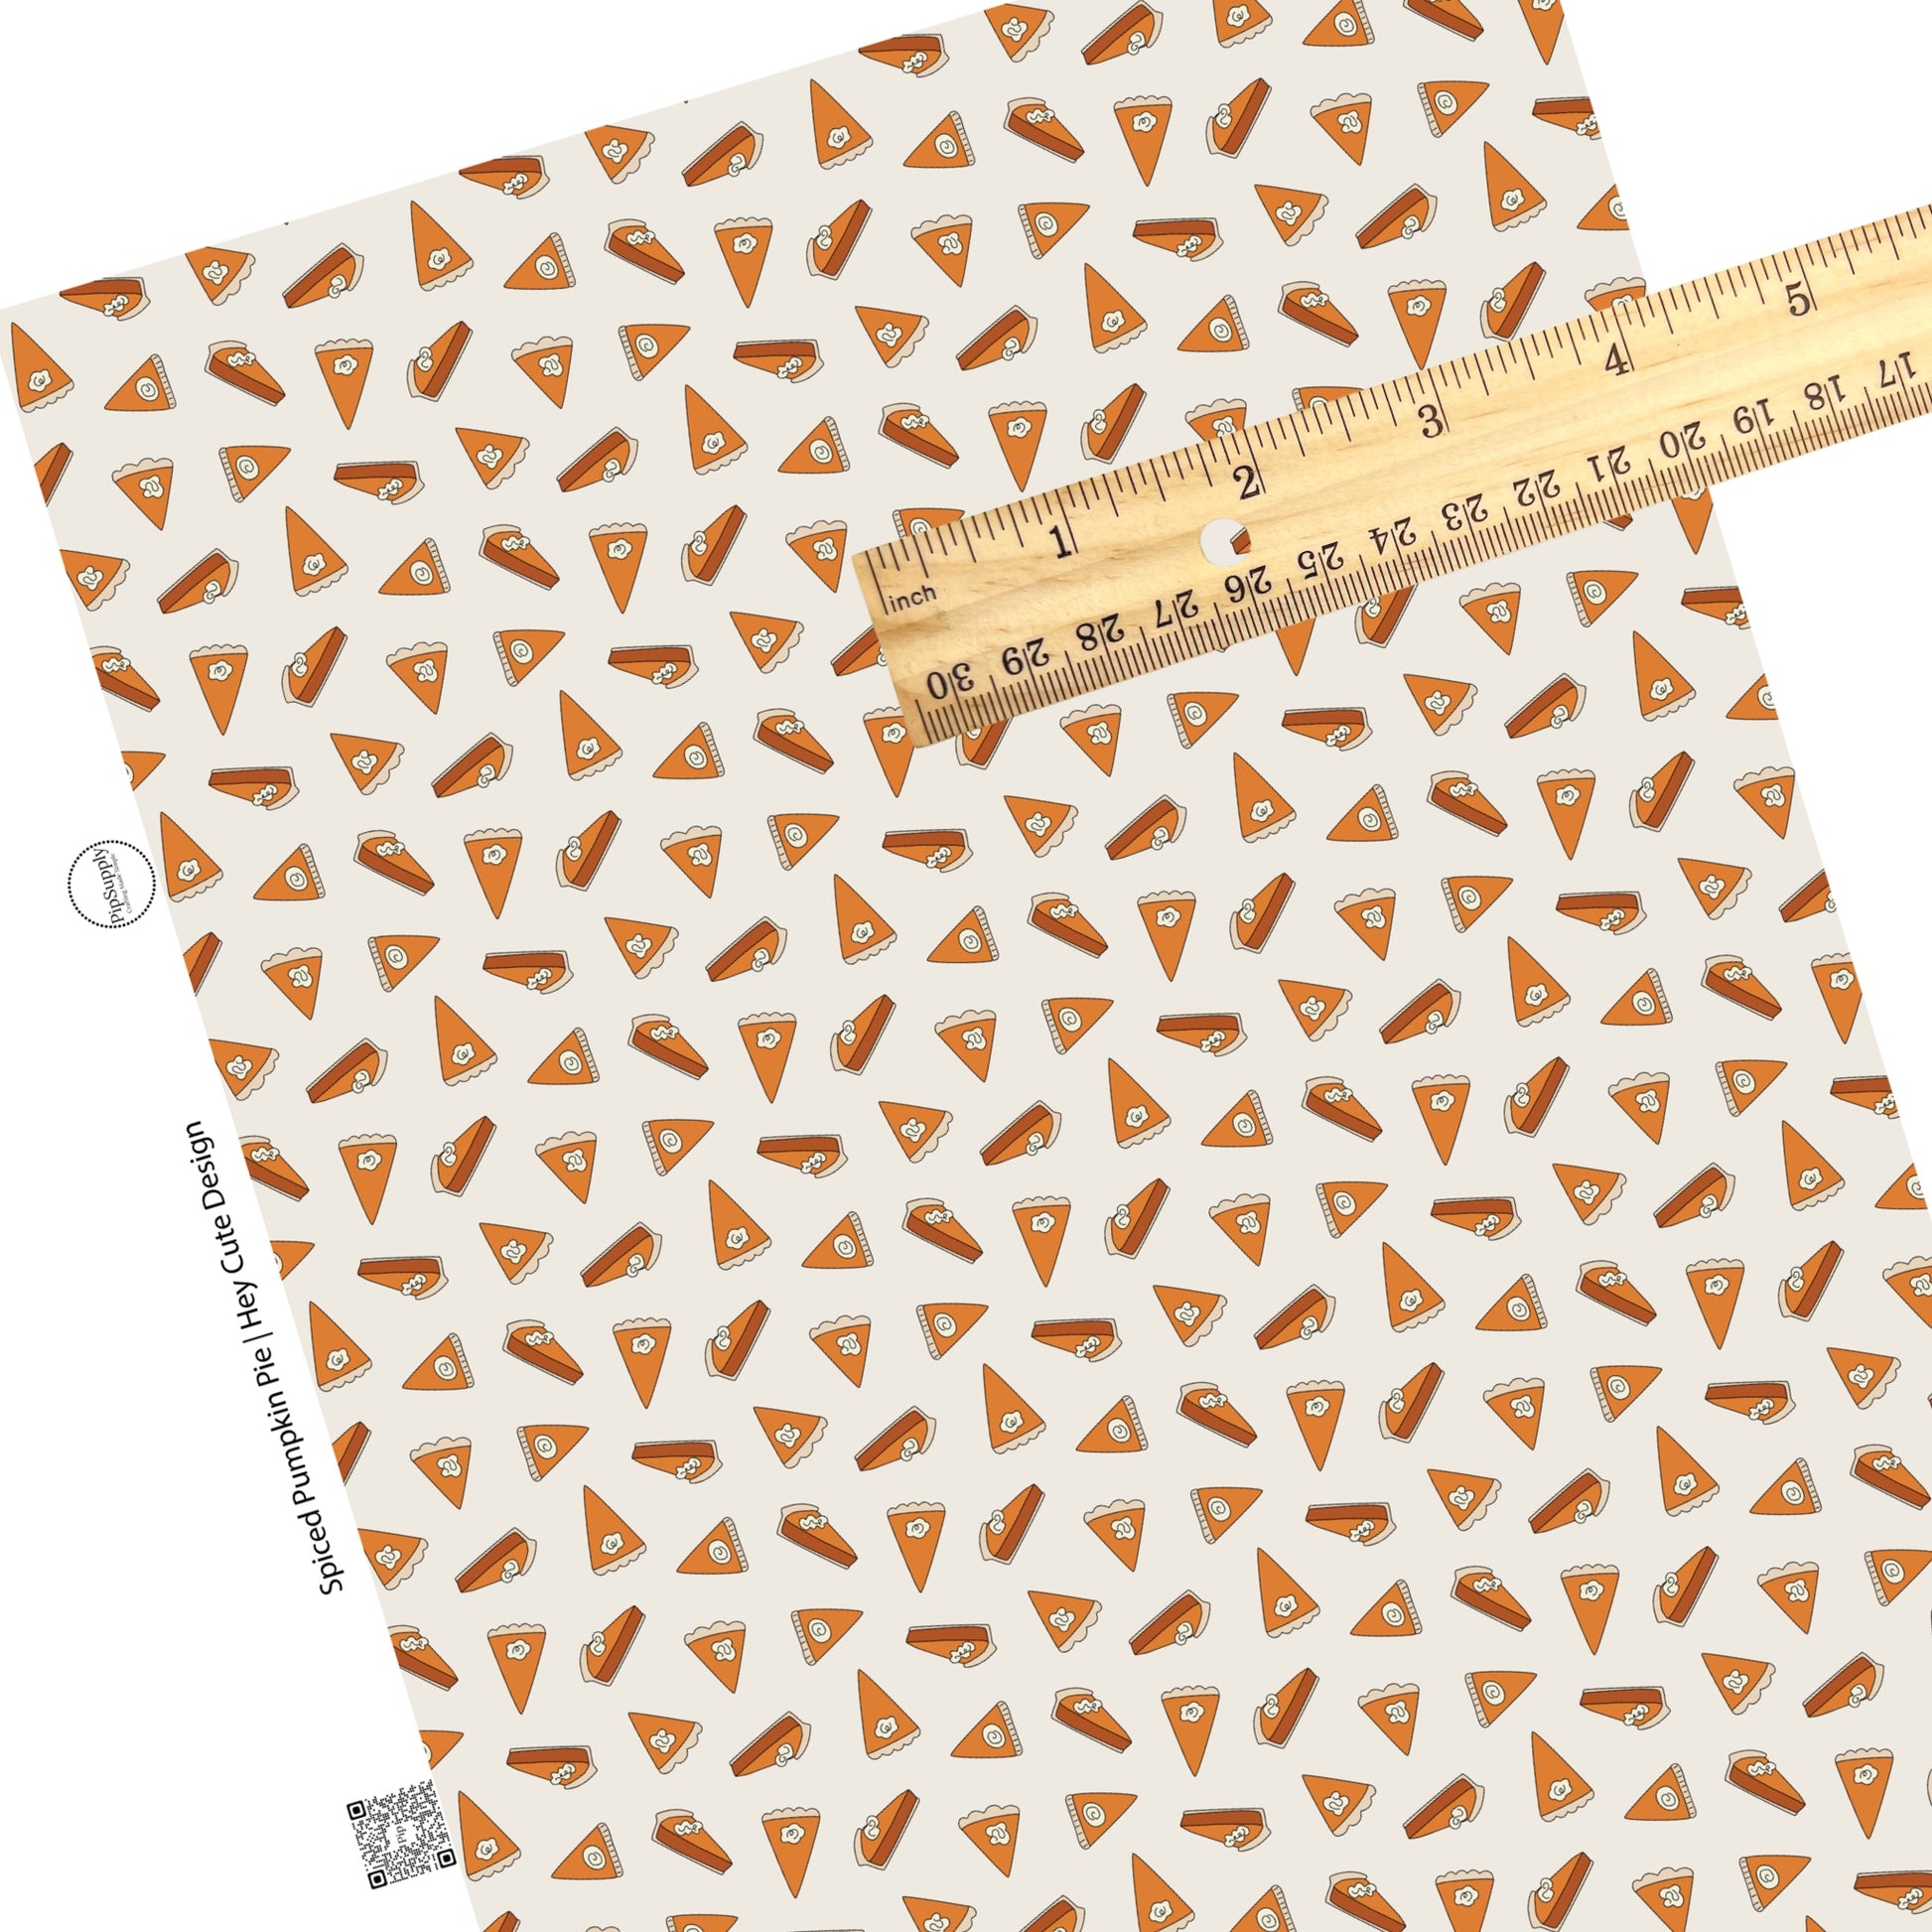 These fall pumpkin themed cream faux leather sheets contain the following design elements: pumpkin pie slices on cream. Our CPSIA compliant faux leather sheets or rolls can be used for all types of crafting projects.